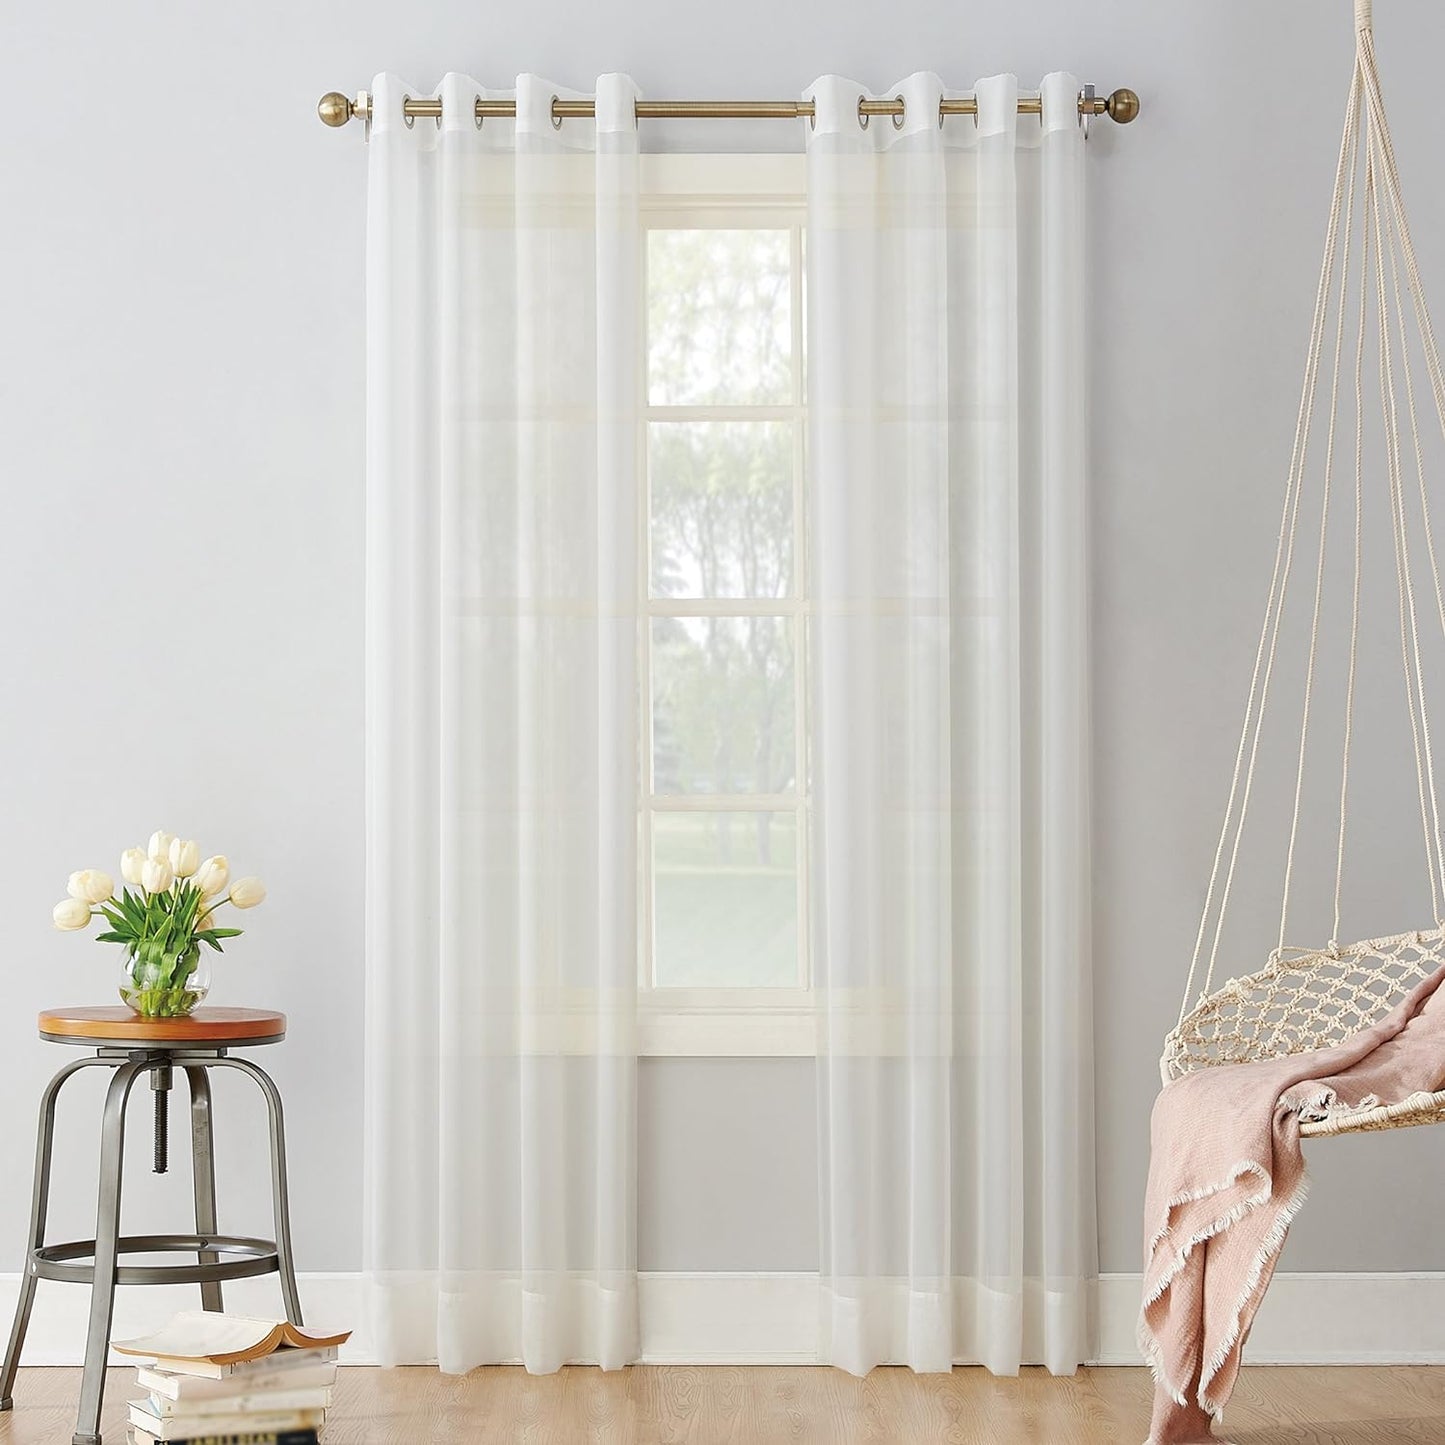 No. 918 Emily Sheer Voile Grommet Curtain Panel, 59" X 95", White  No. 918 Eggshell Off-White Curtain Panel 59" X 95"